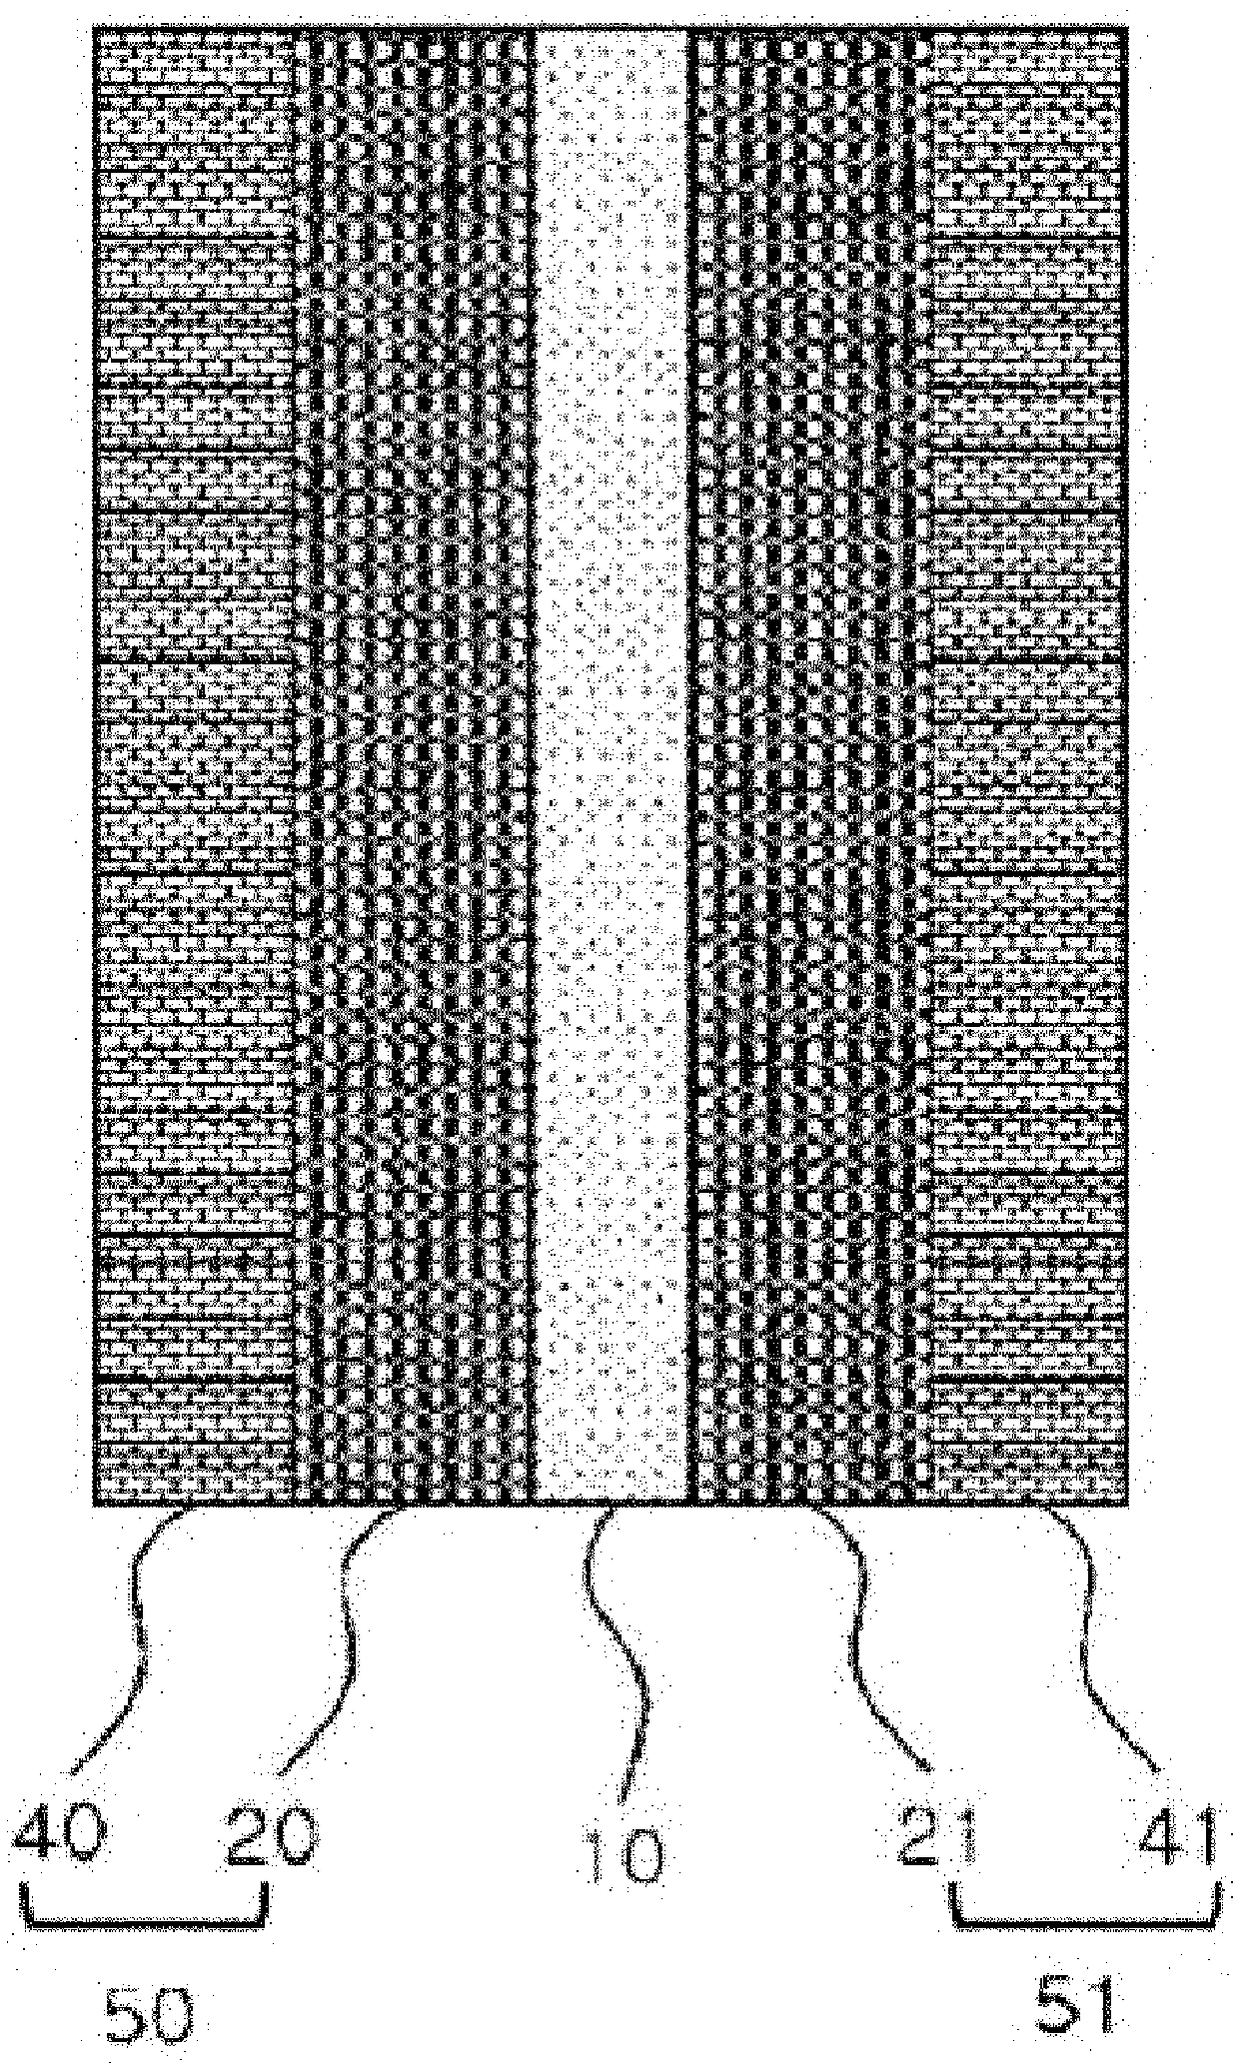 Method for preparing membrane-electrode assembly, membrane-electrode assembly prepared therefrom, and fuel cell comprising same